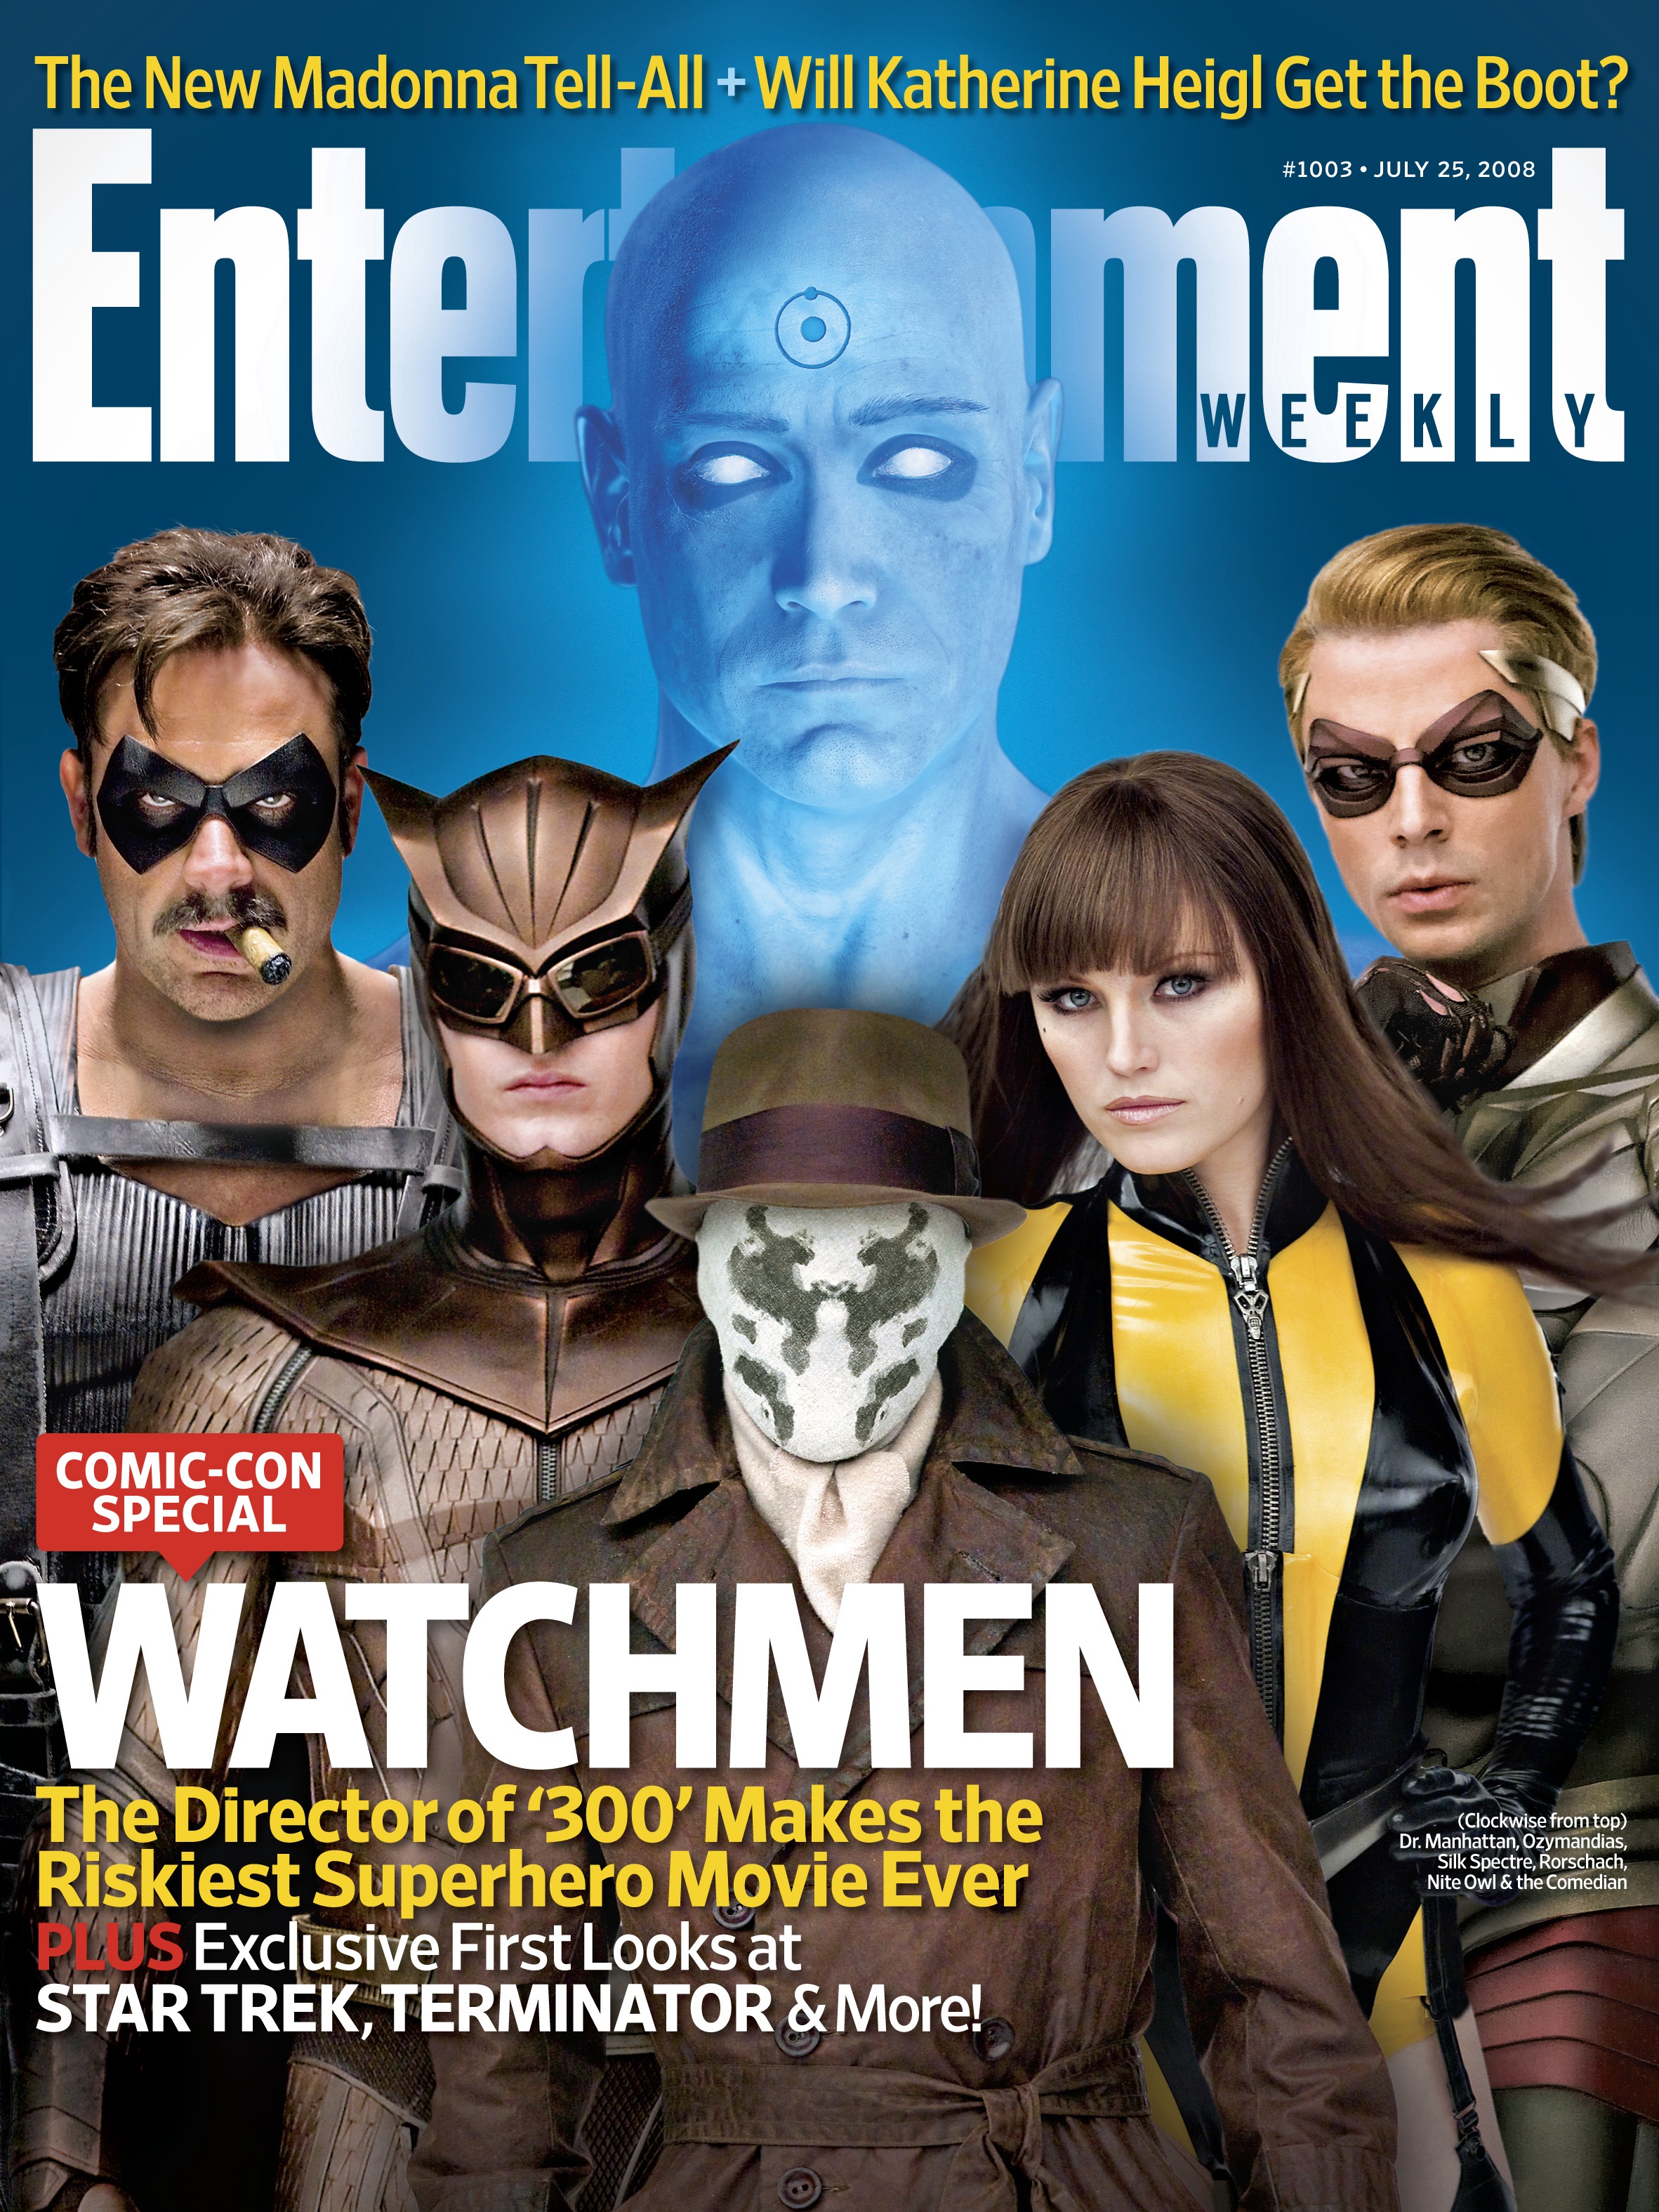 Watchmen Magazine covers - VERY Hi-Res - Oh No They Didnt!